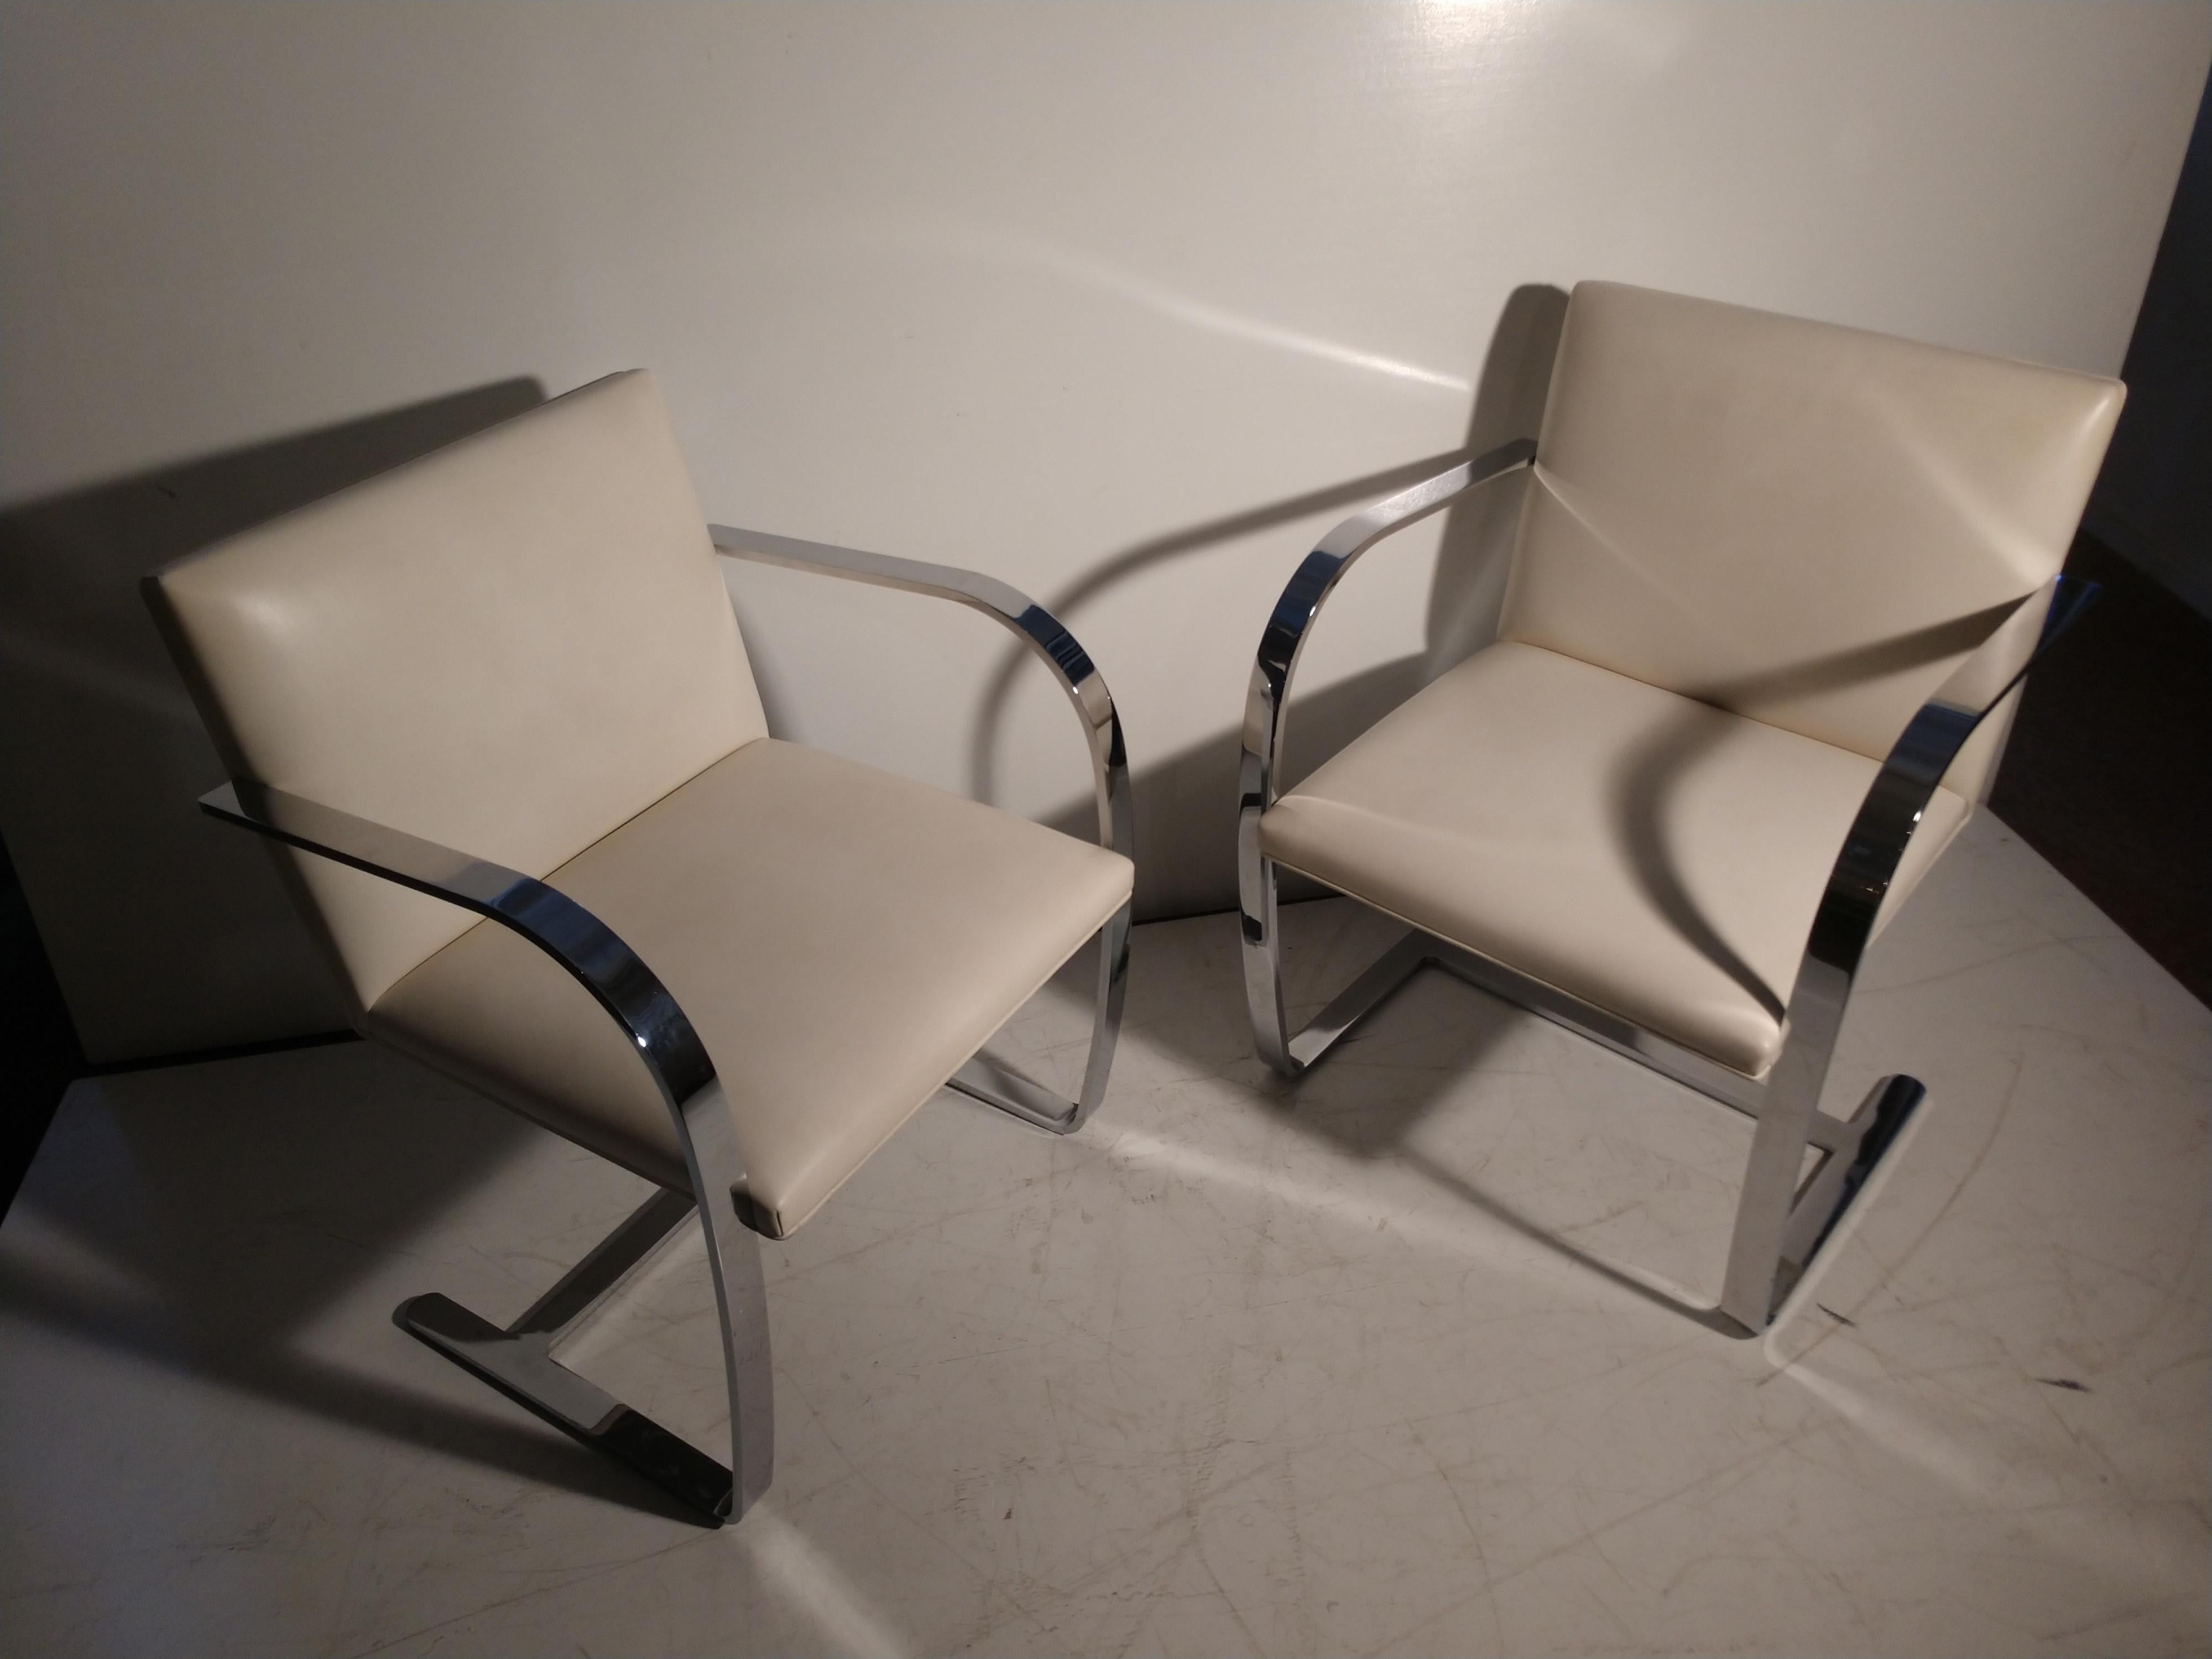 Fabulous set of 4 signed Knoll Brno lounge dining chairs by Mies Van Der Rohe in white leather. All original in excellent vintage condition with minimal wear to leather. Absolute no damage to stainless steel which is polished to a mirror finish. See